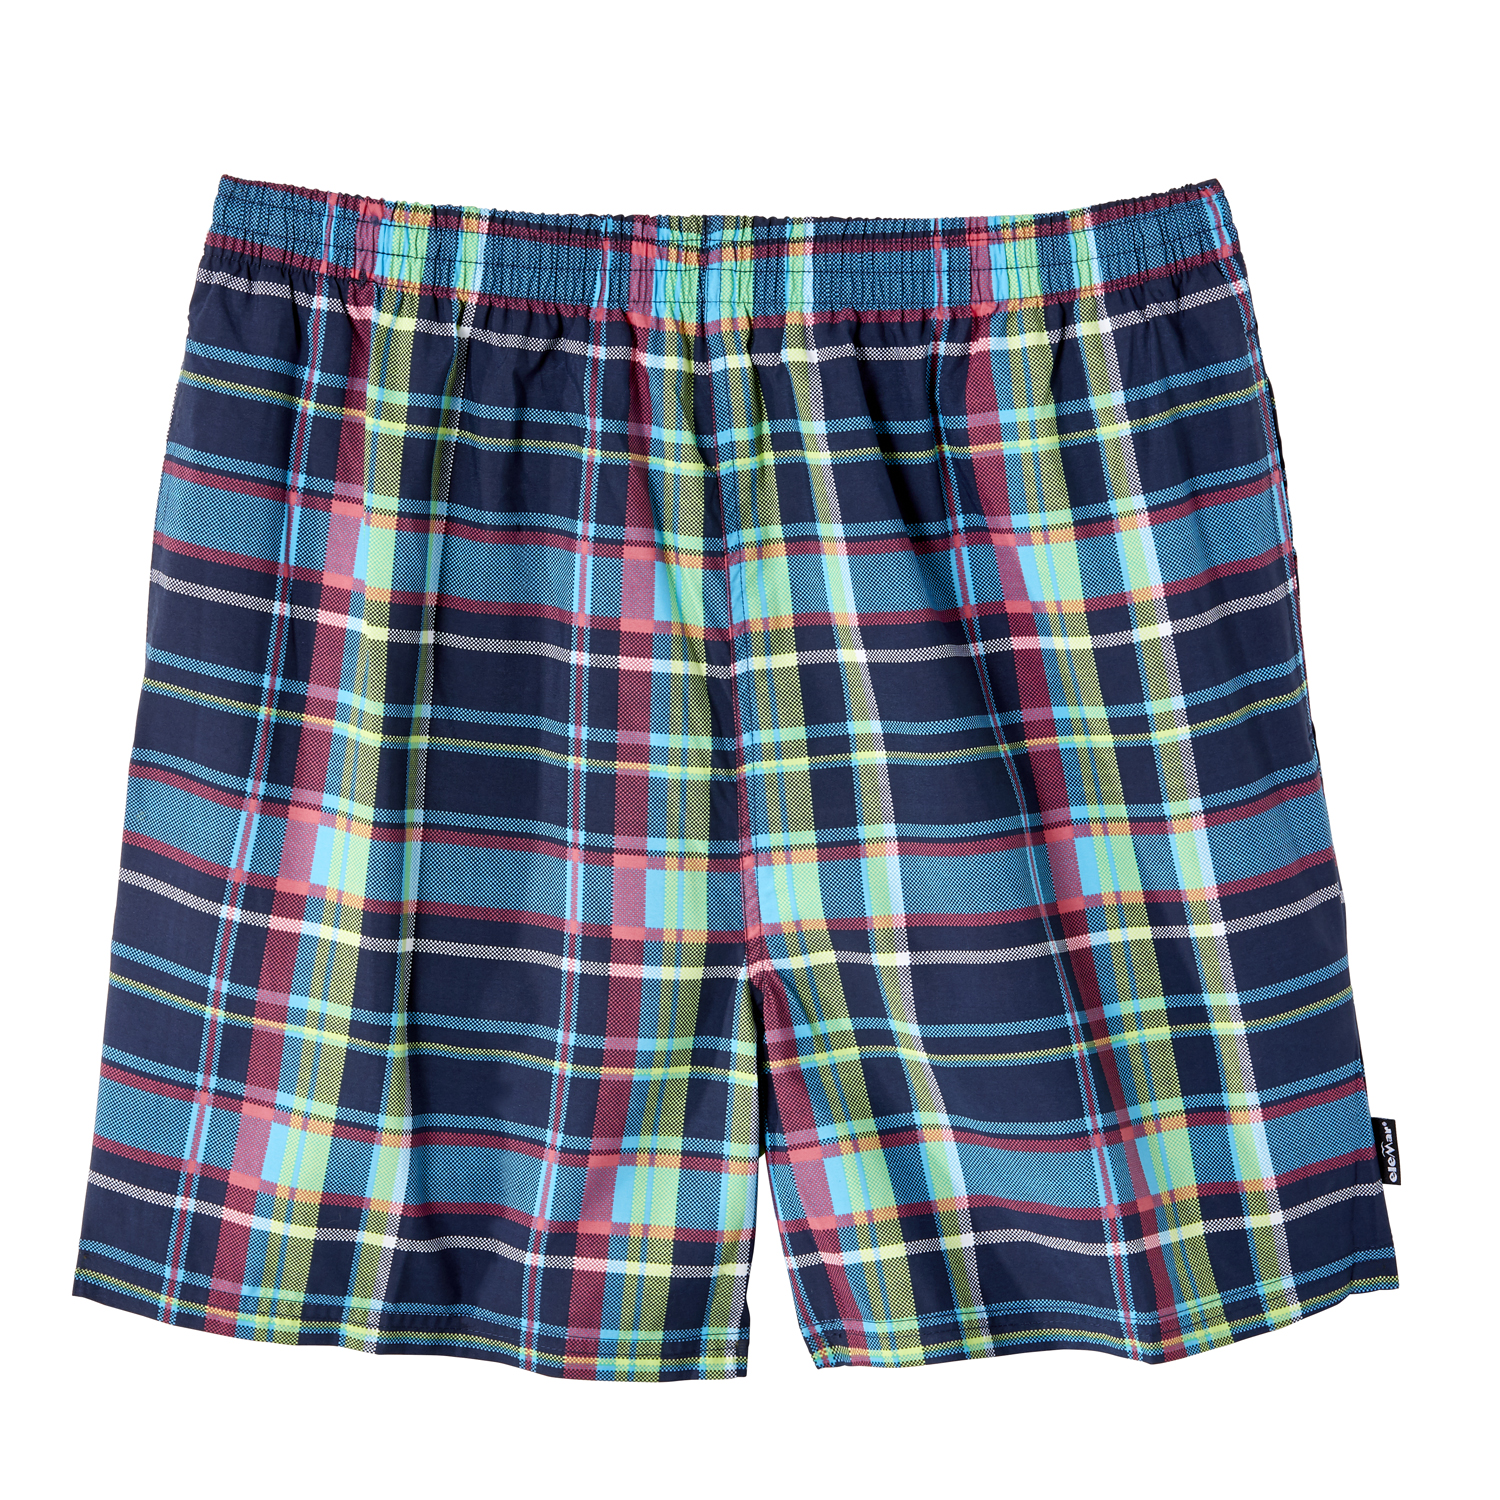 Swim bermudas by eleMar for men blue checkered in oversizes up to 6XL